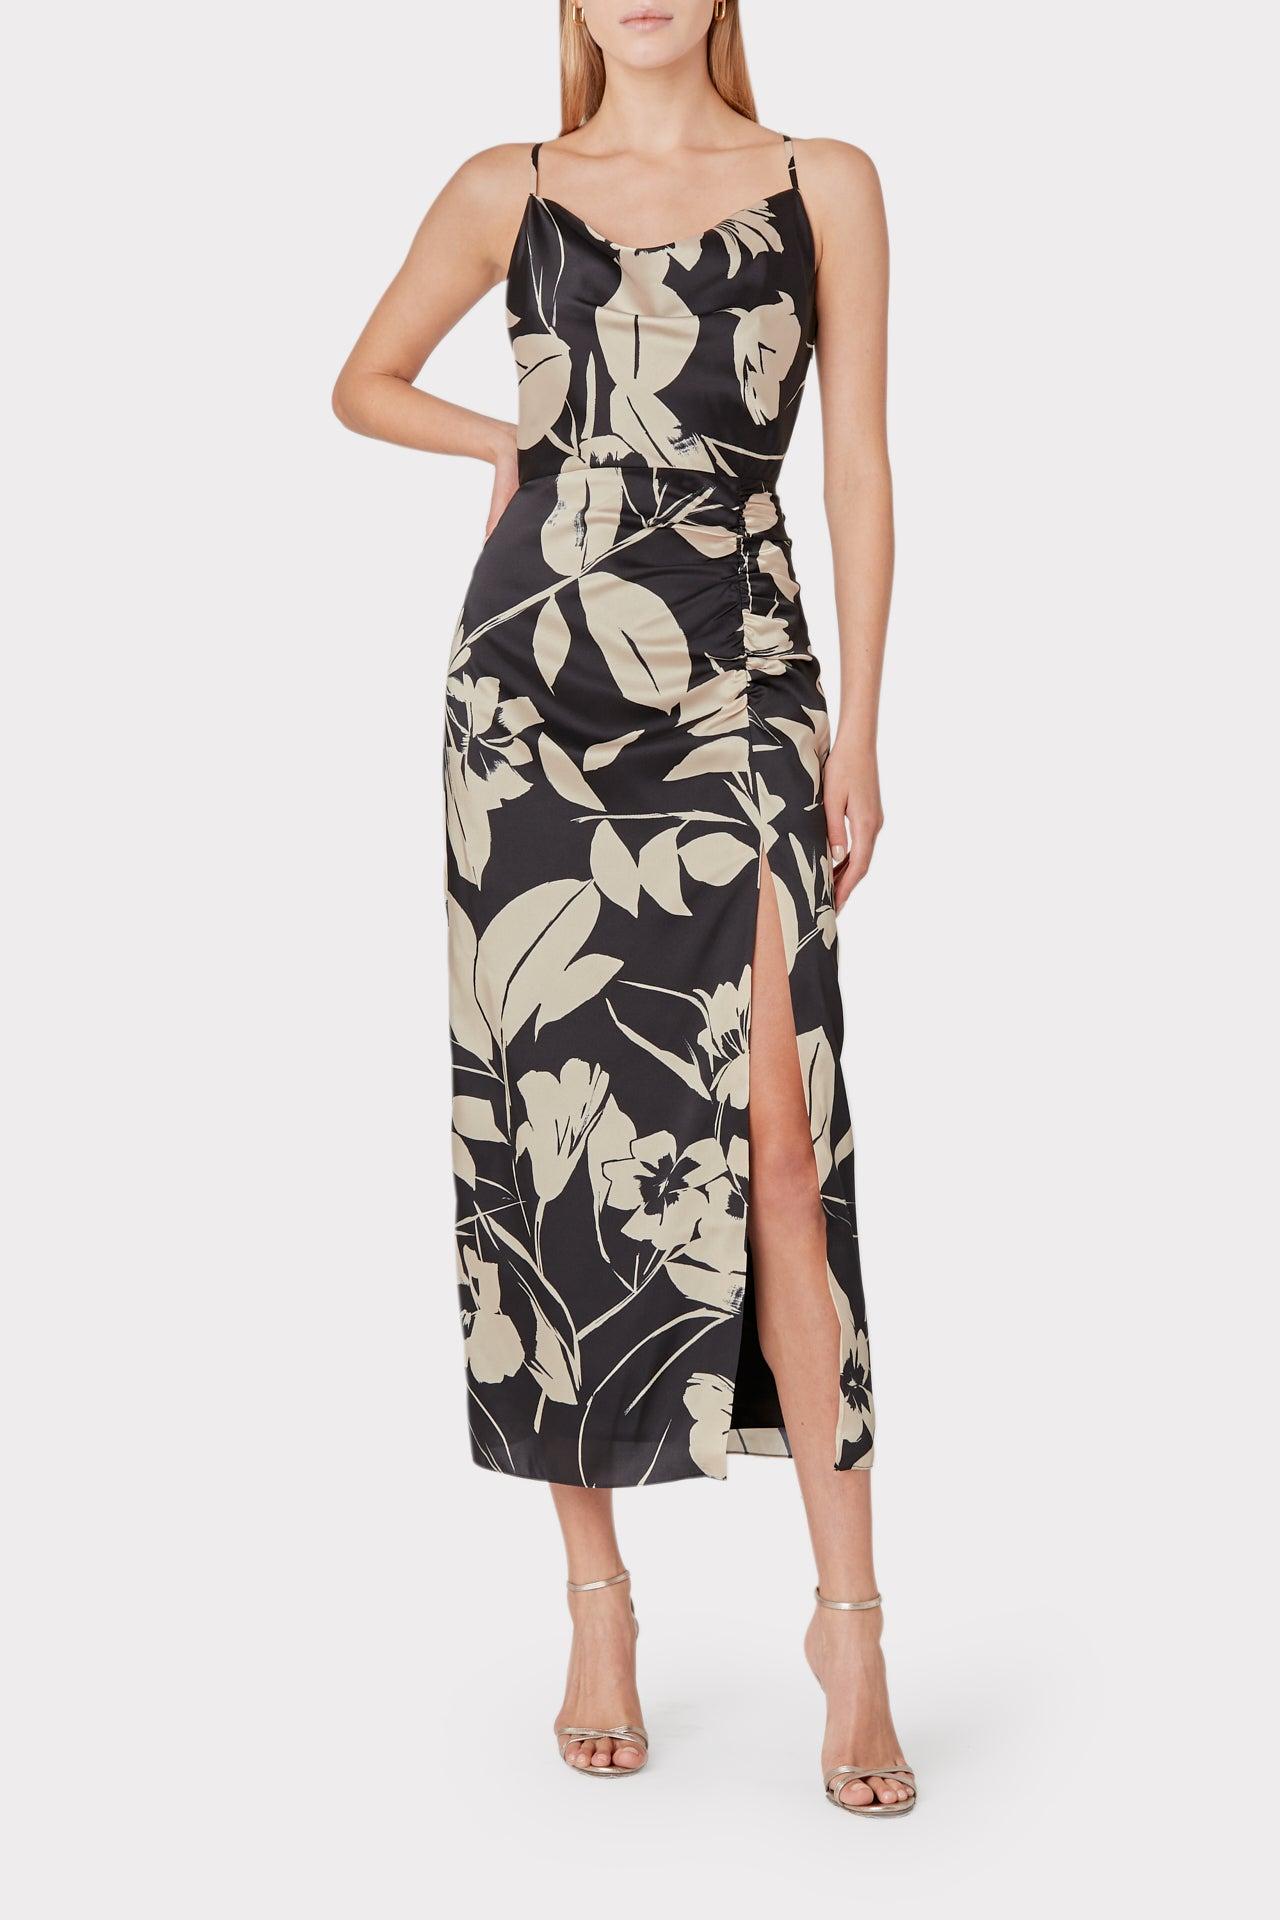 MILLY Lilliana Winter Floral Print Dress in Black | Lyst